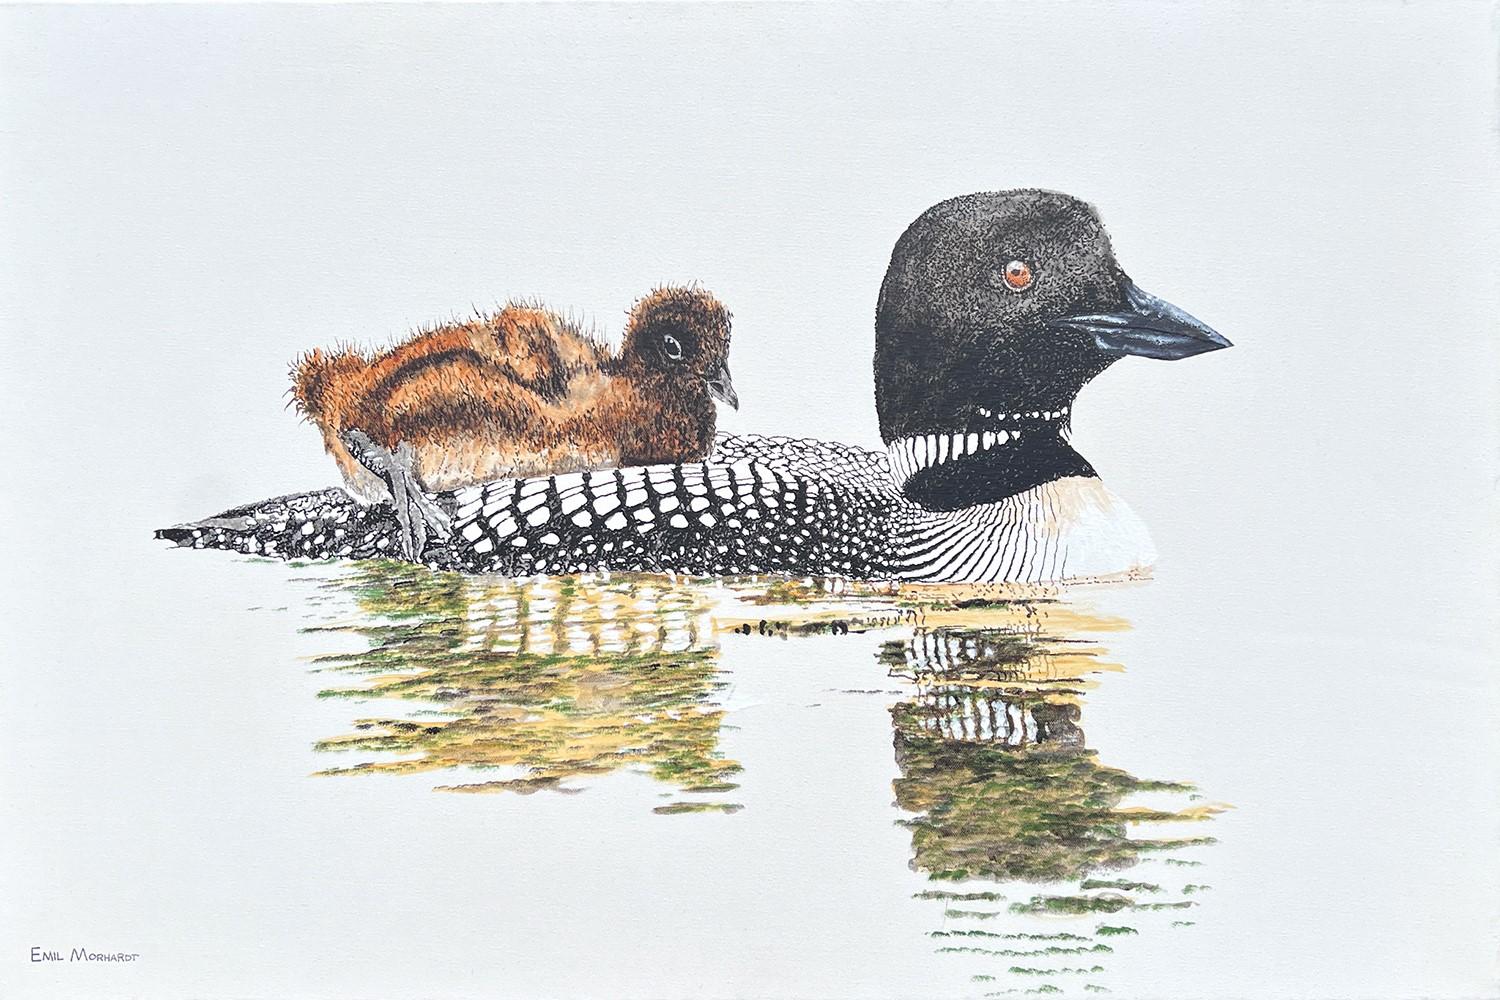 Emil Morhardt Animal Painting - Loon with Chick, Original Painting